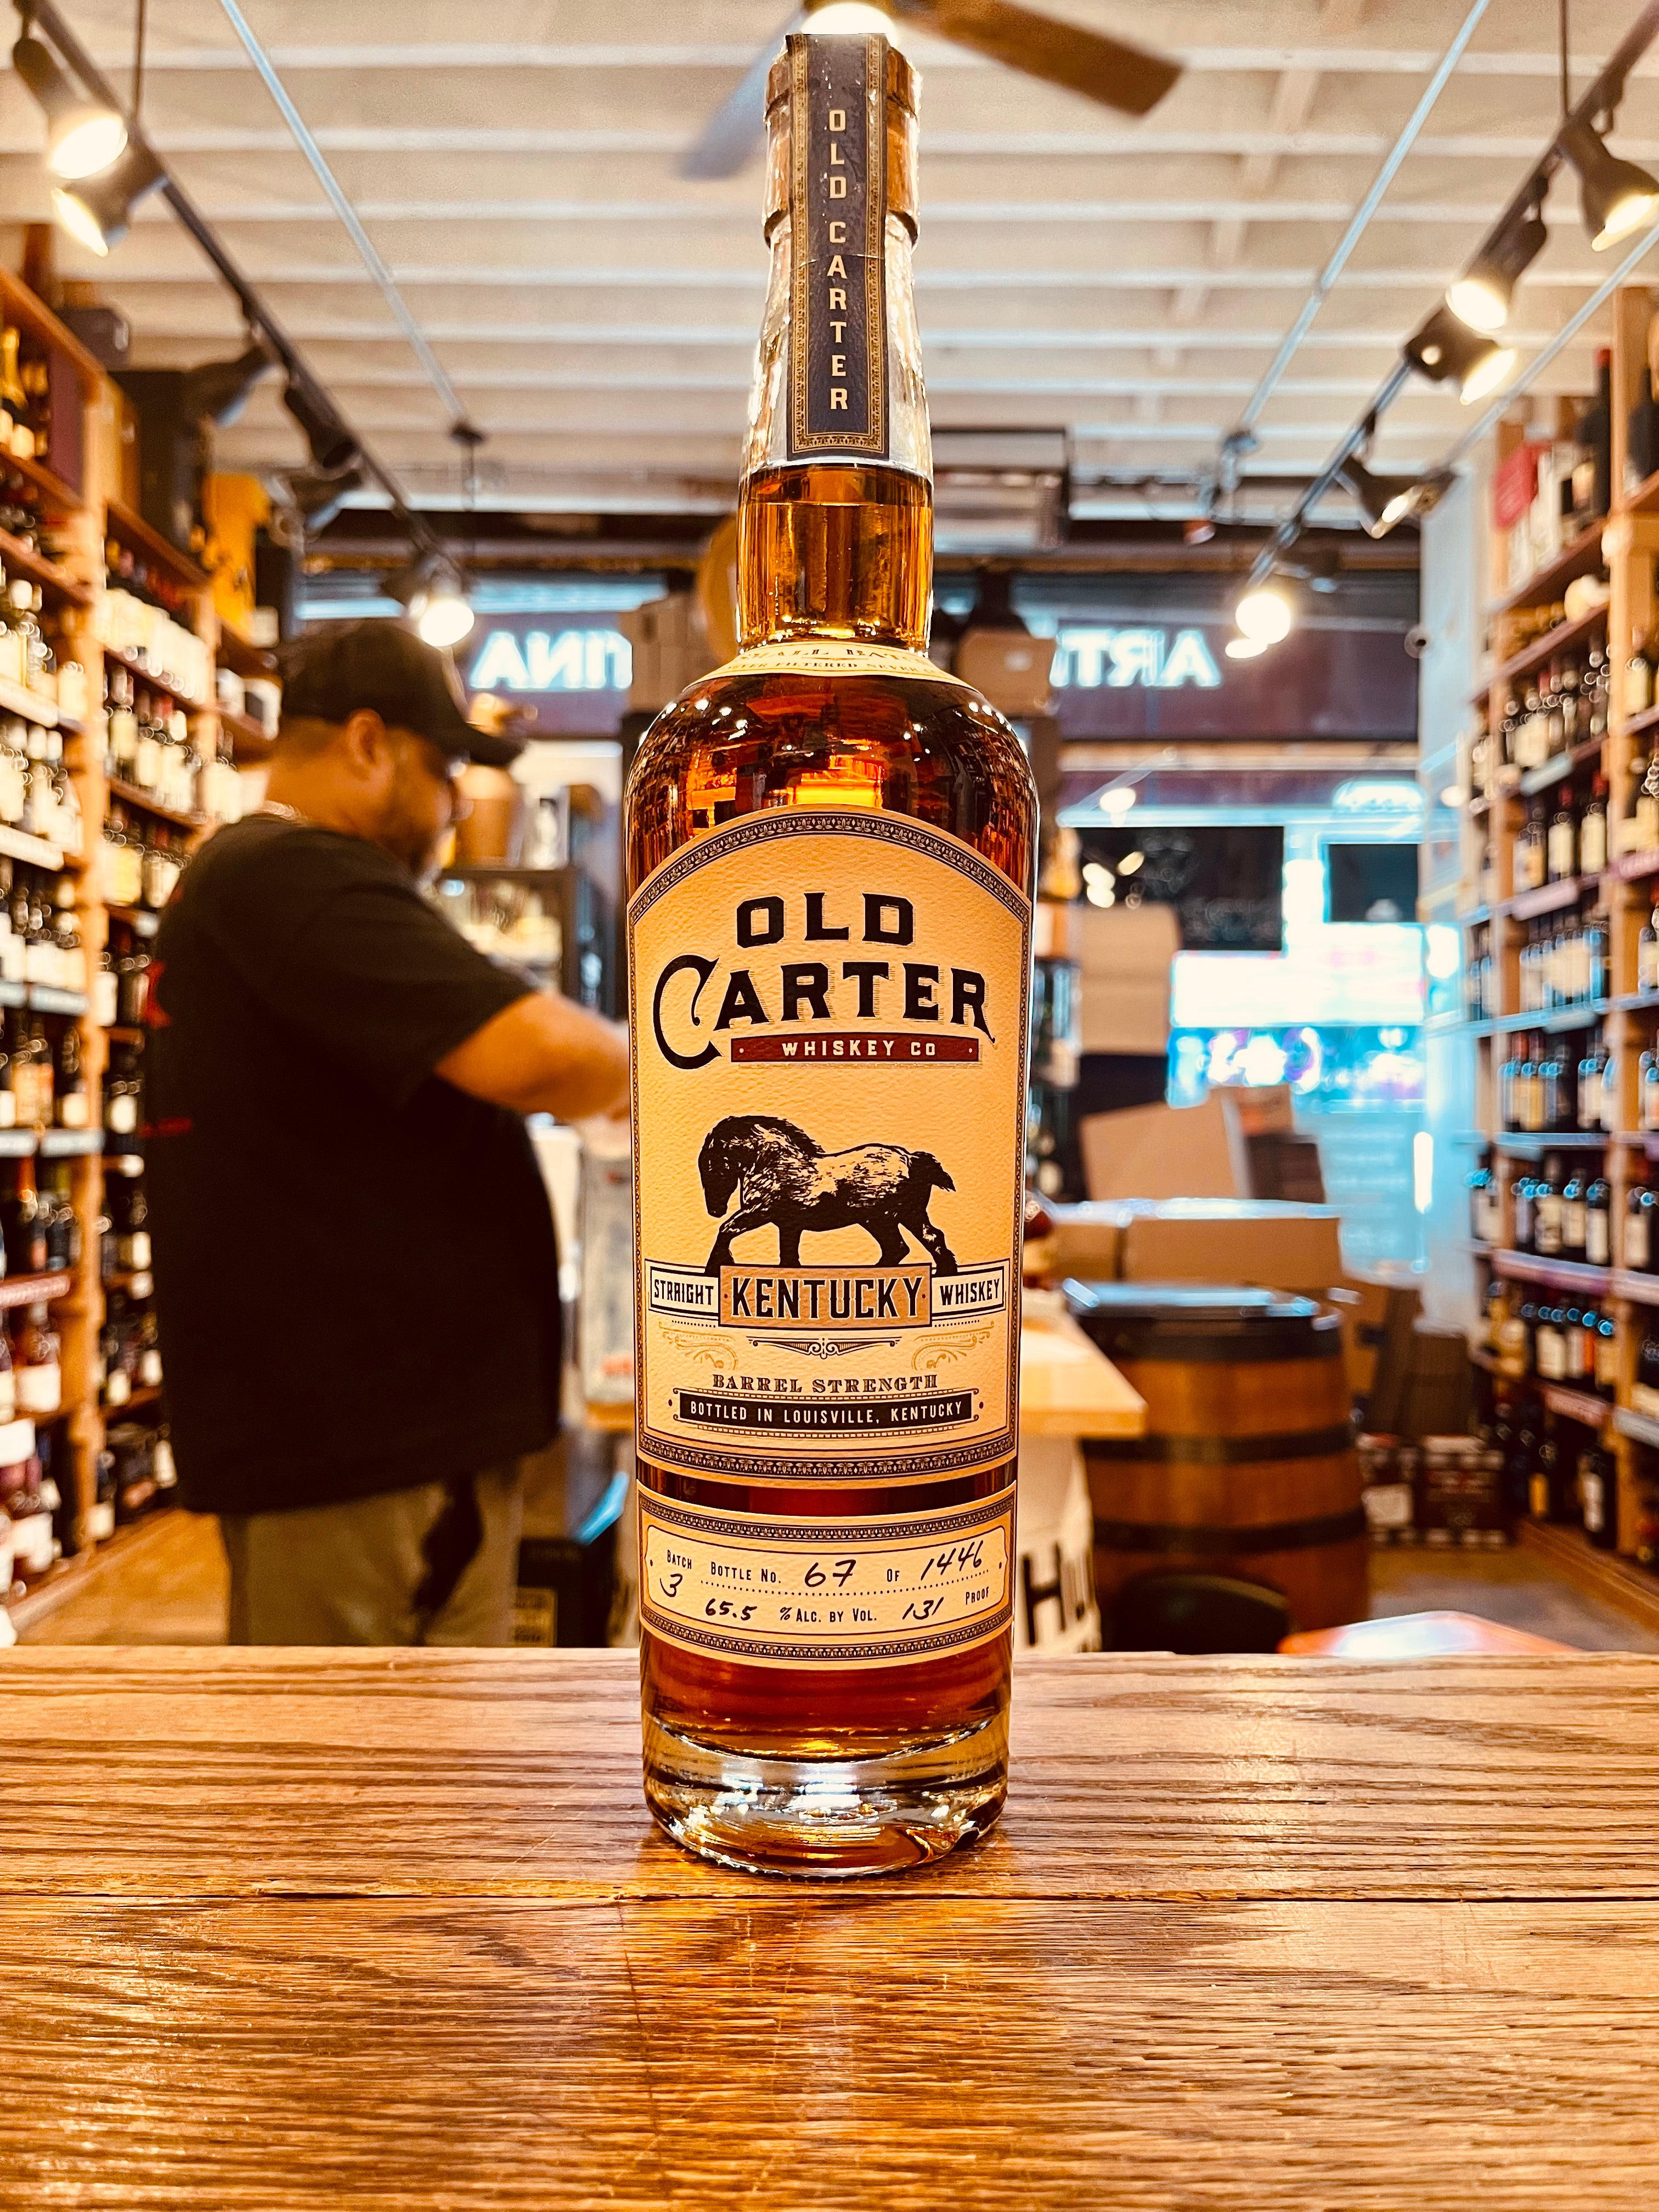 Old Carter Straight Kentucky Whiskey Barrel Strength Batch 3 750mL a tall clear glass bottle with a beige label and the image of a horse with a wooden top